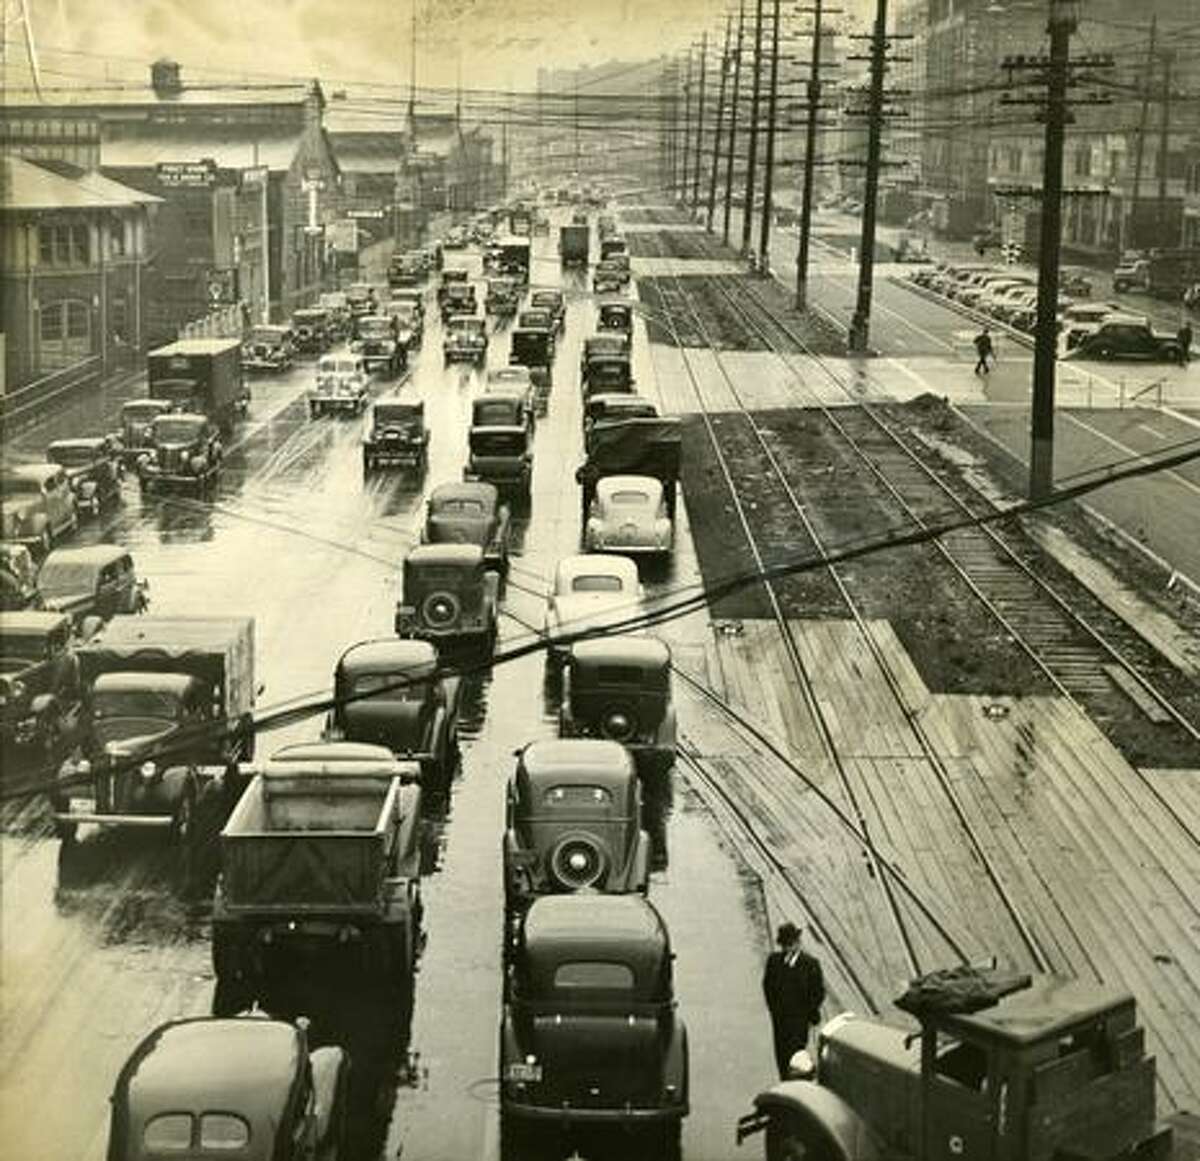 Alaskan Way prior to construction of of the Alaskan Way Viaduct. Exact date unknown.